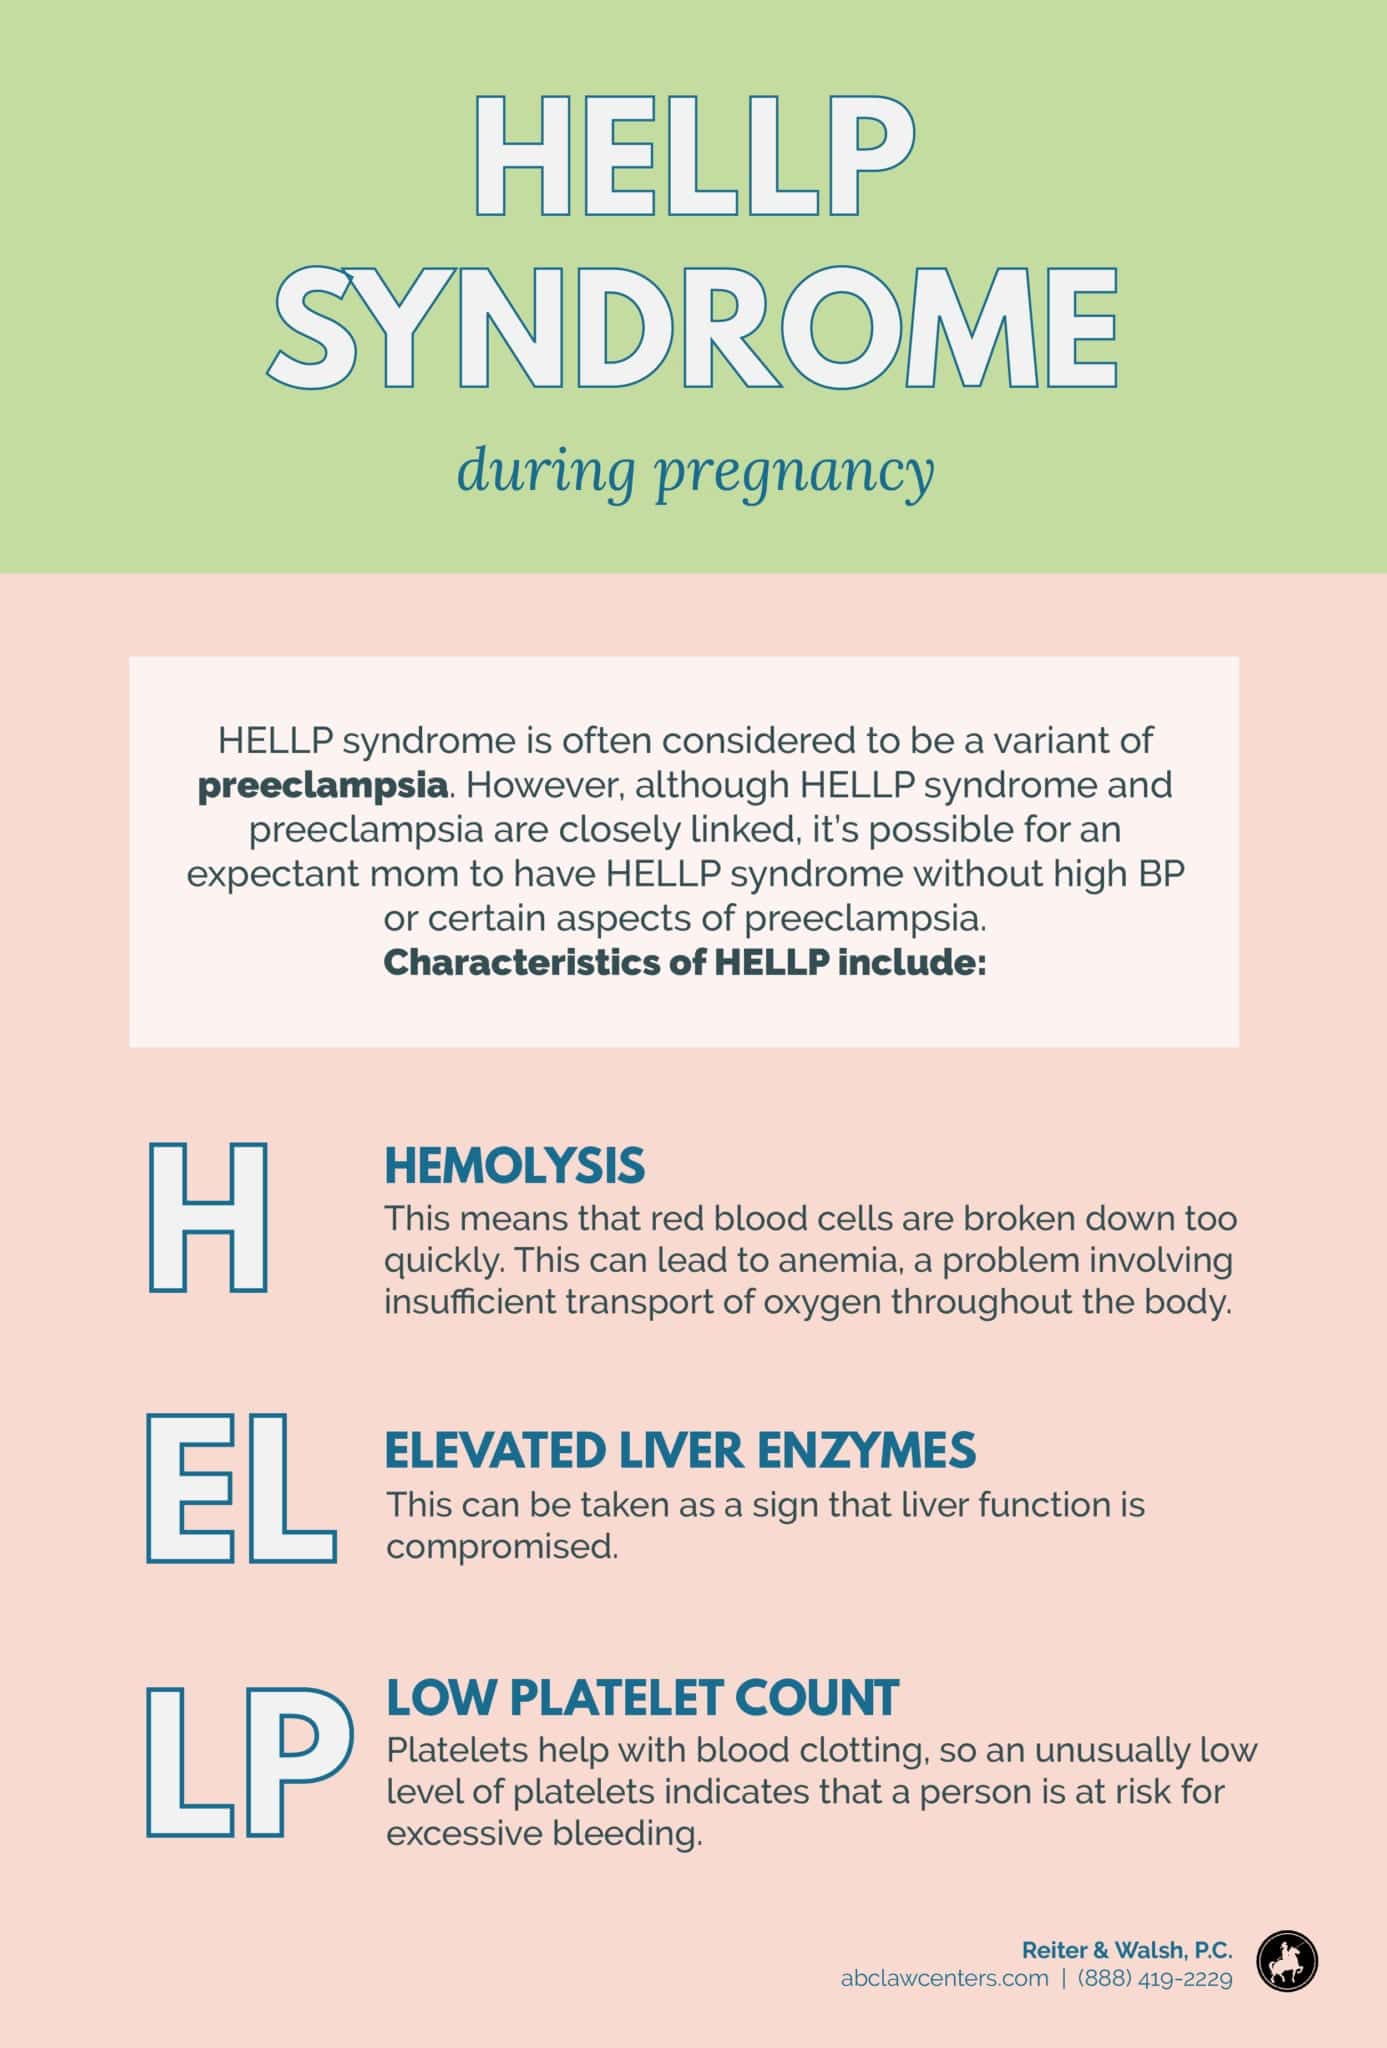 HELLP syndrome during pregnancy